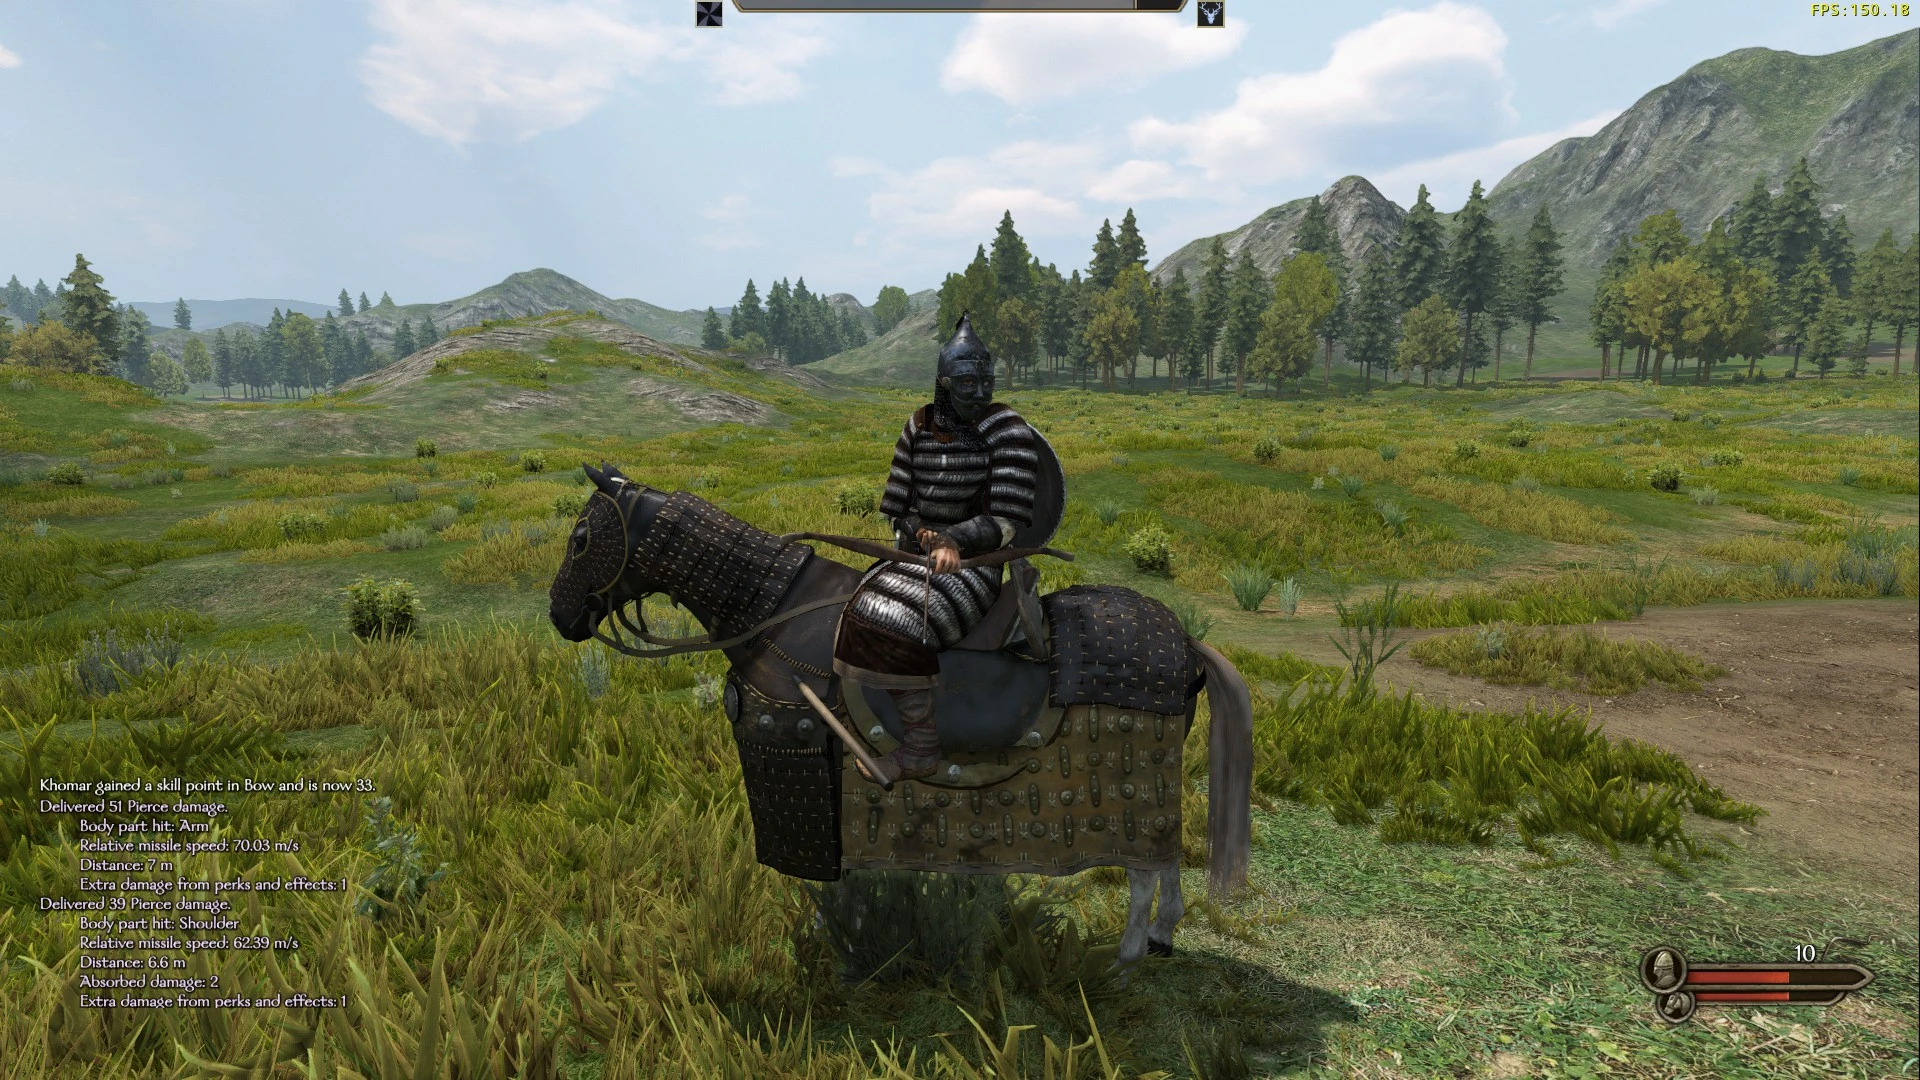 mount and blade 2 full version free